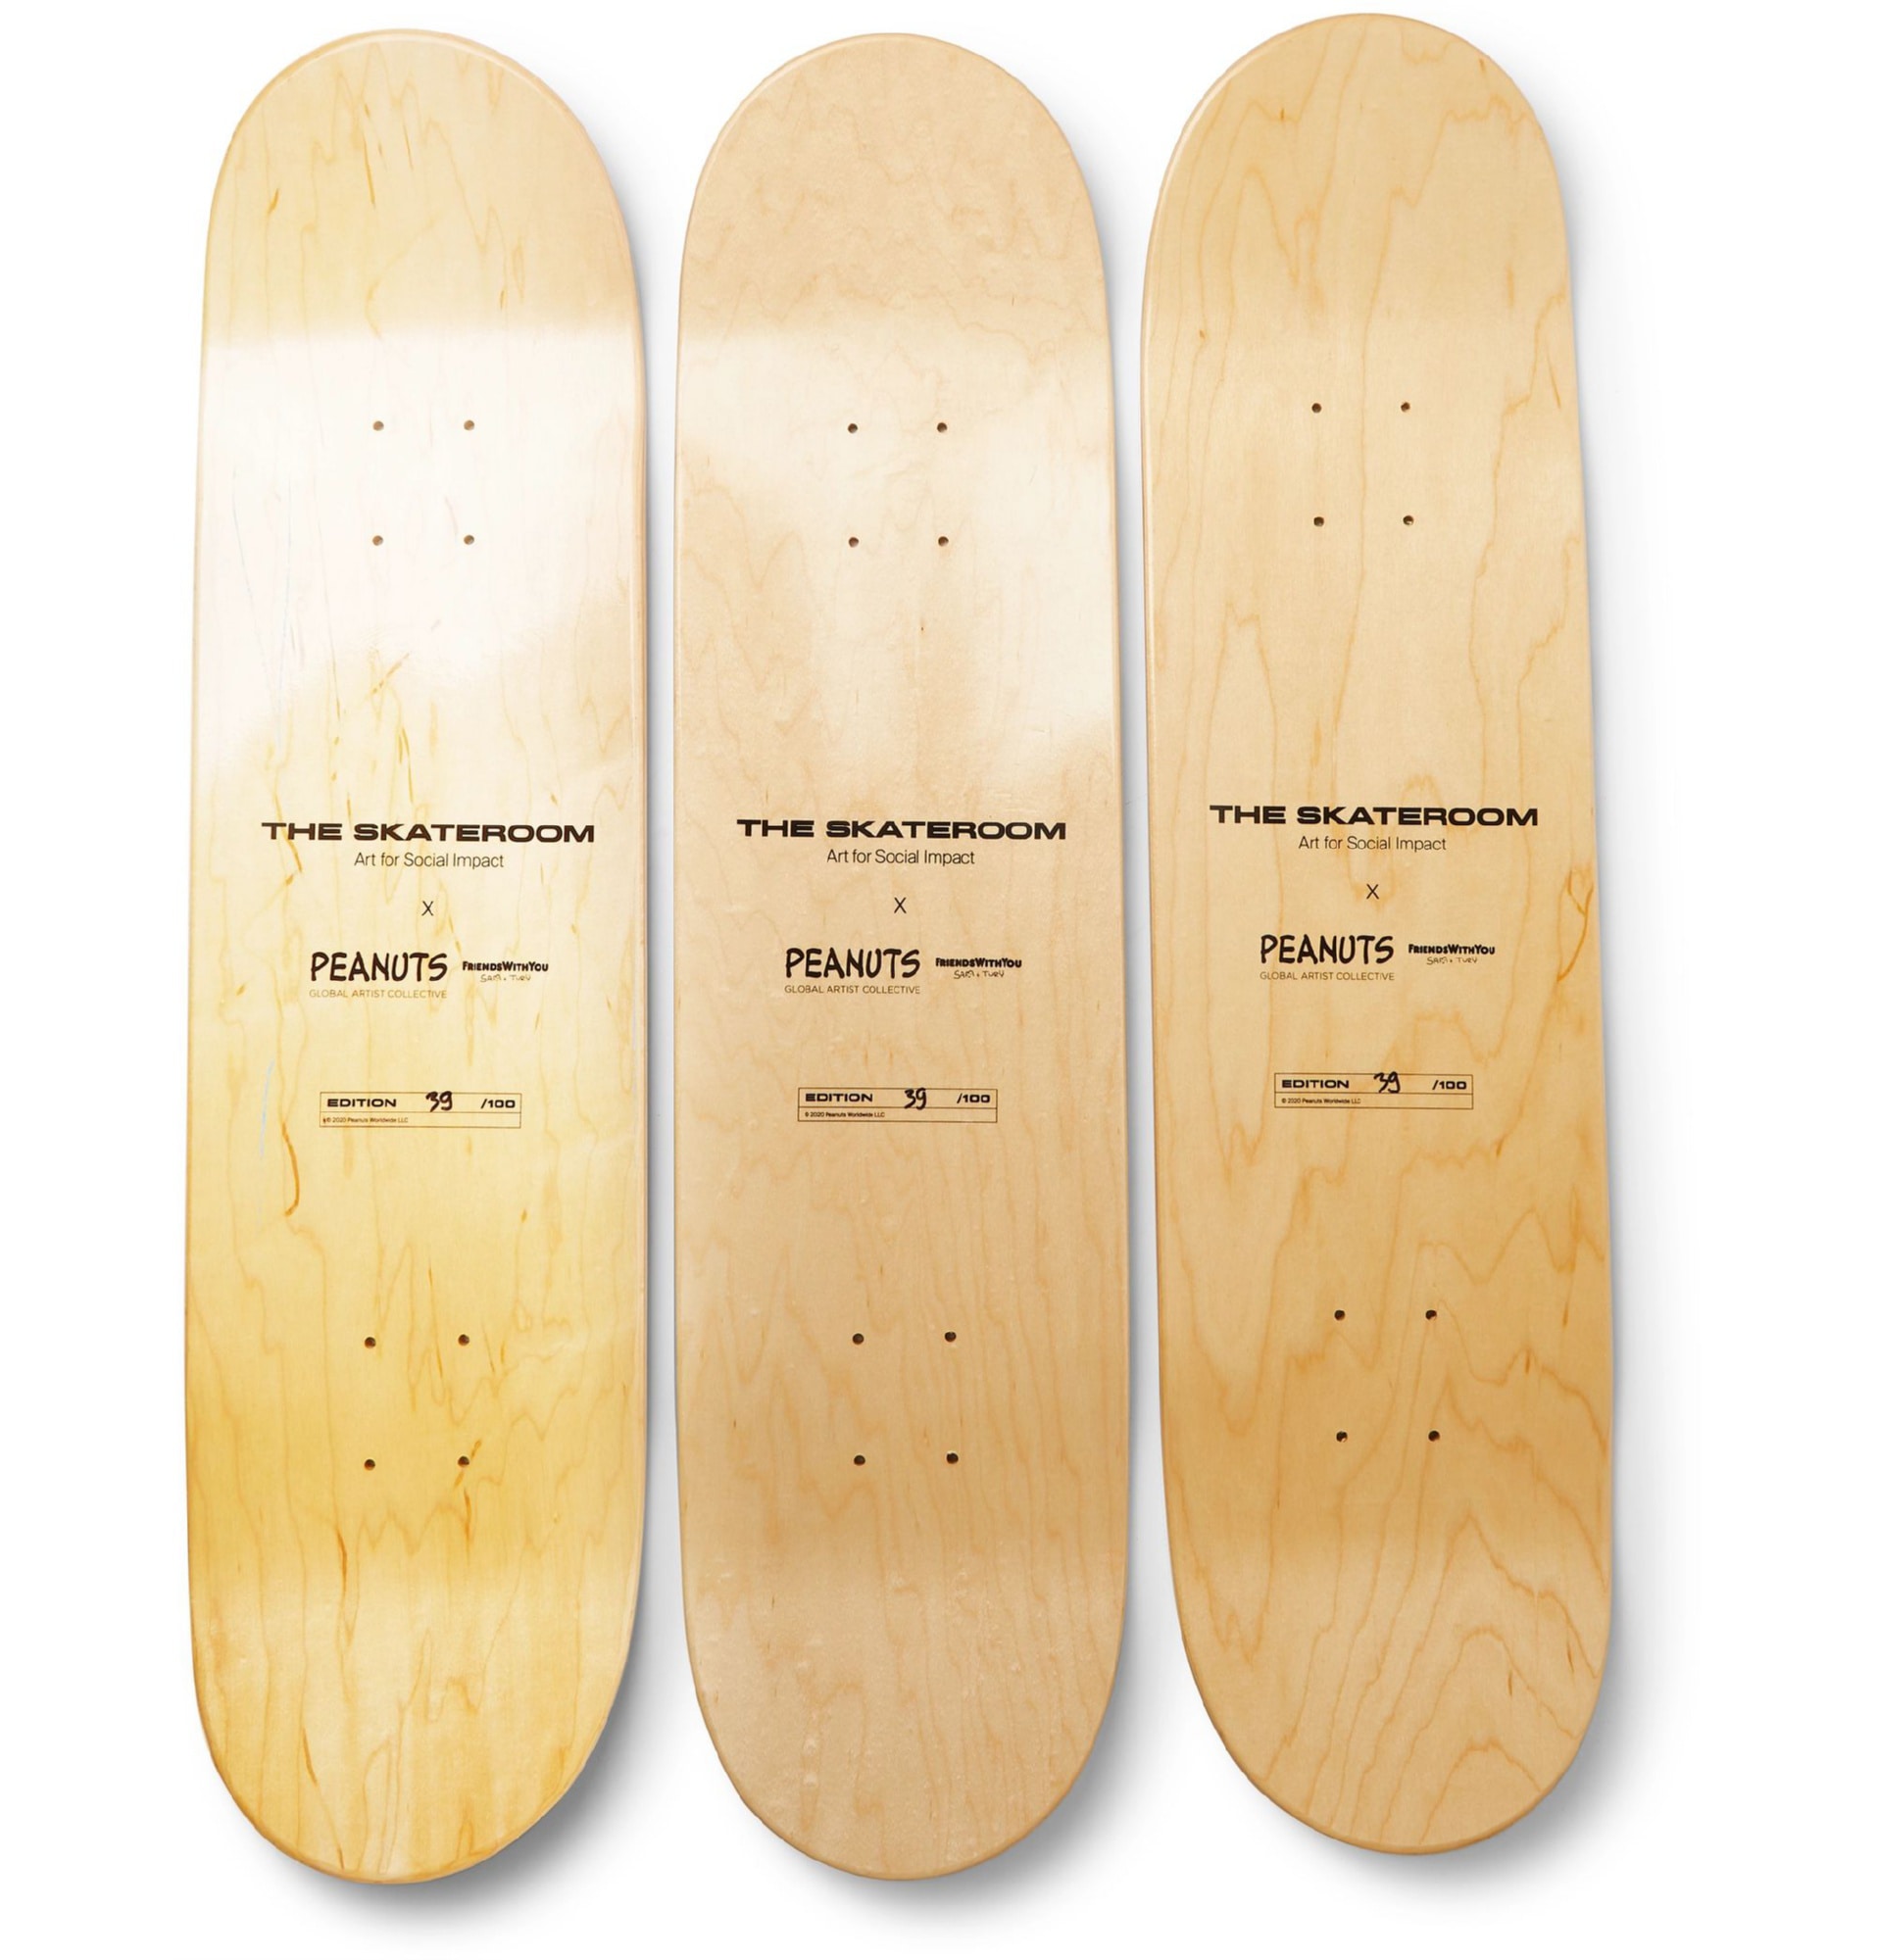 plus-peanuts-by-friendswithyou-set-of-three-printed-wooden-skateboards-19971654707226832